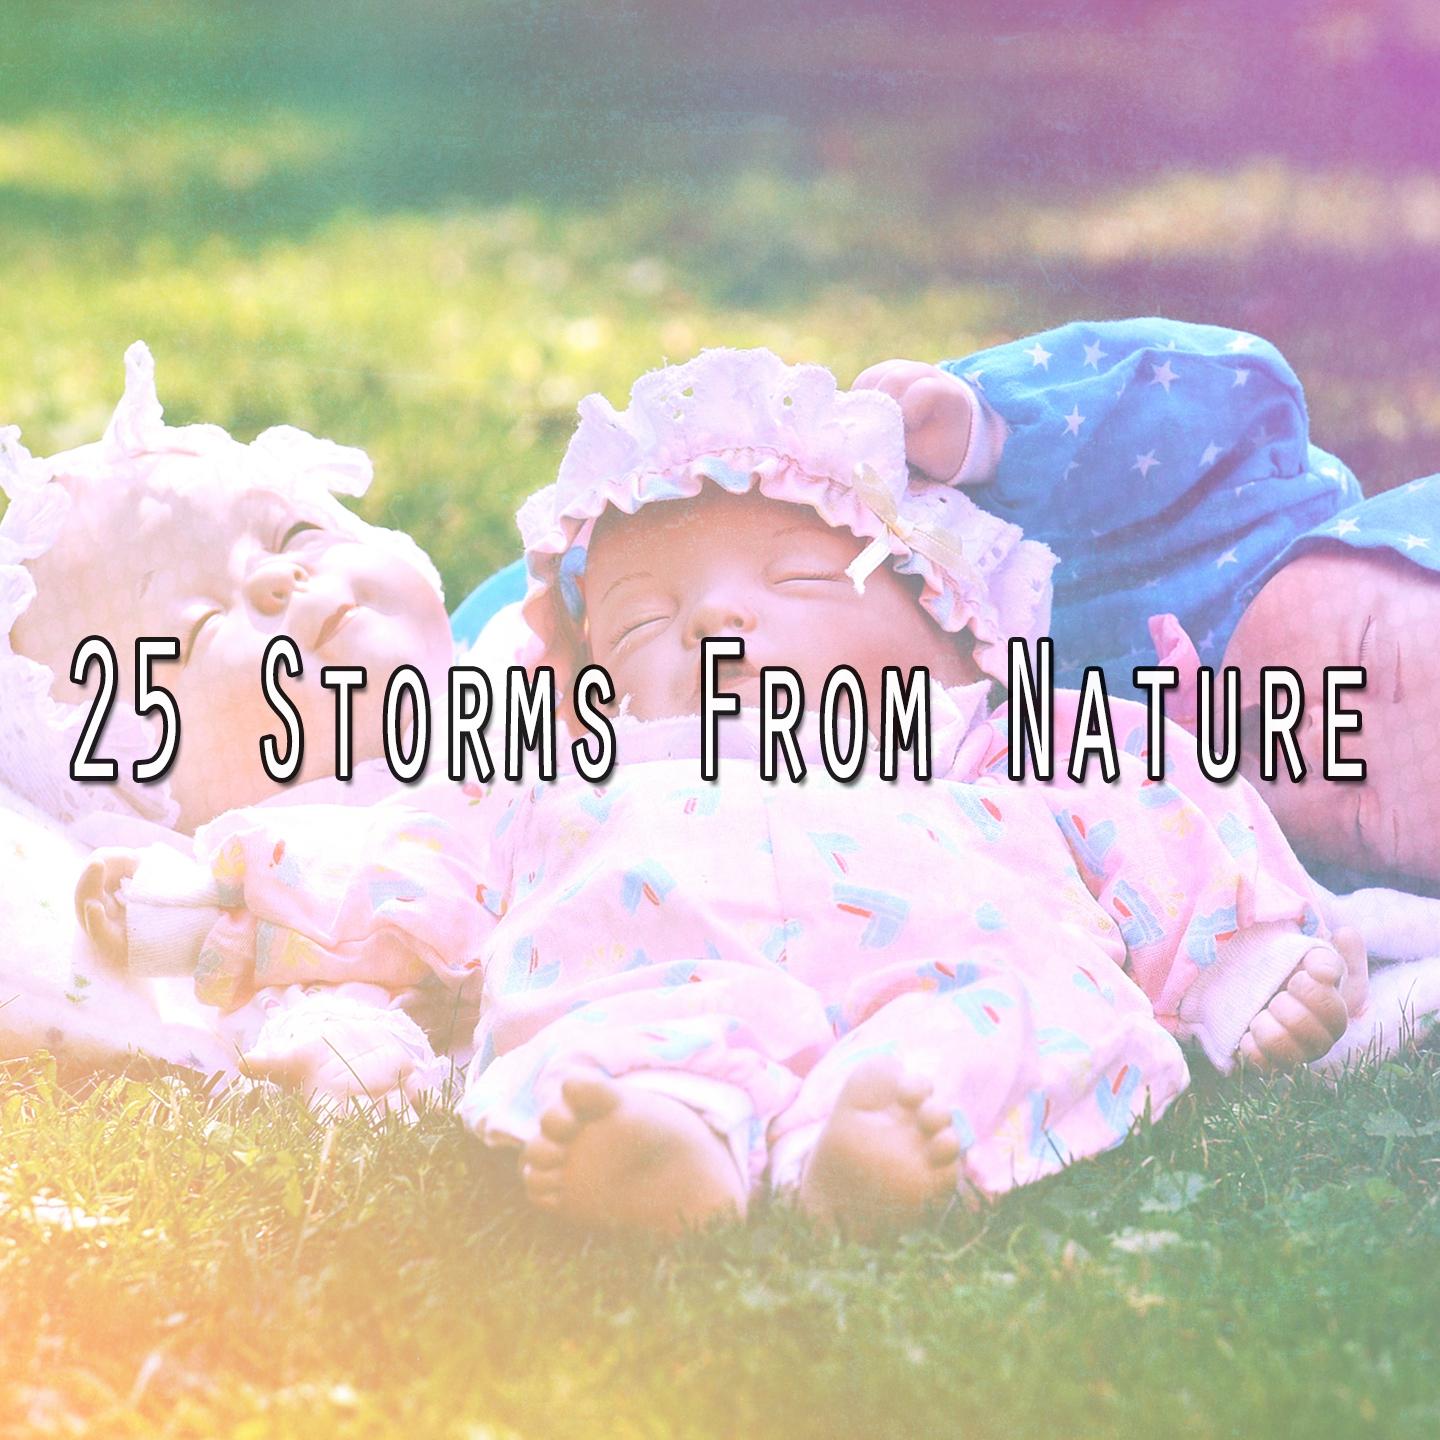 25 Storms From Nature